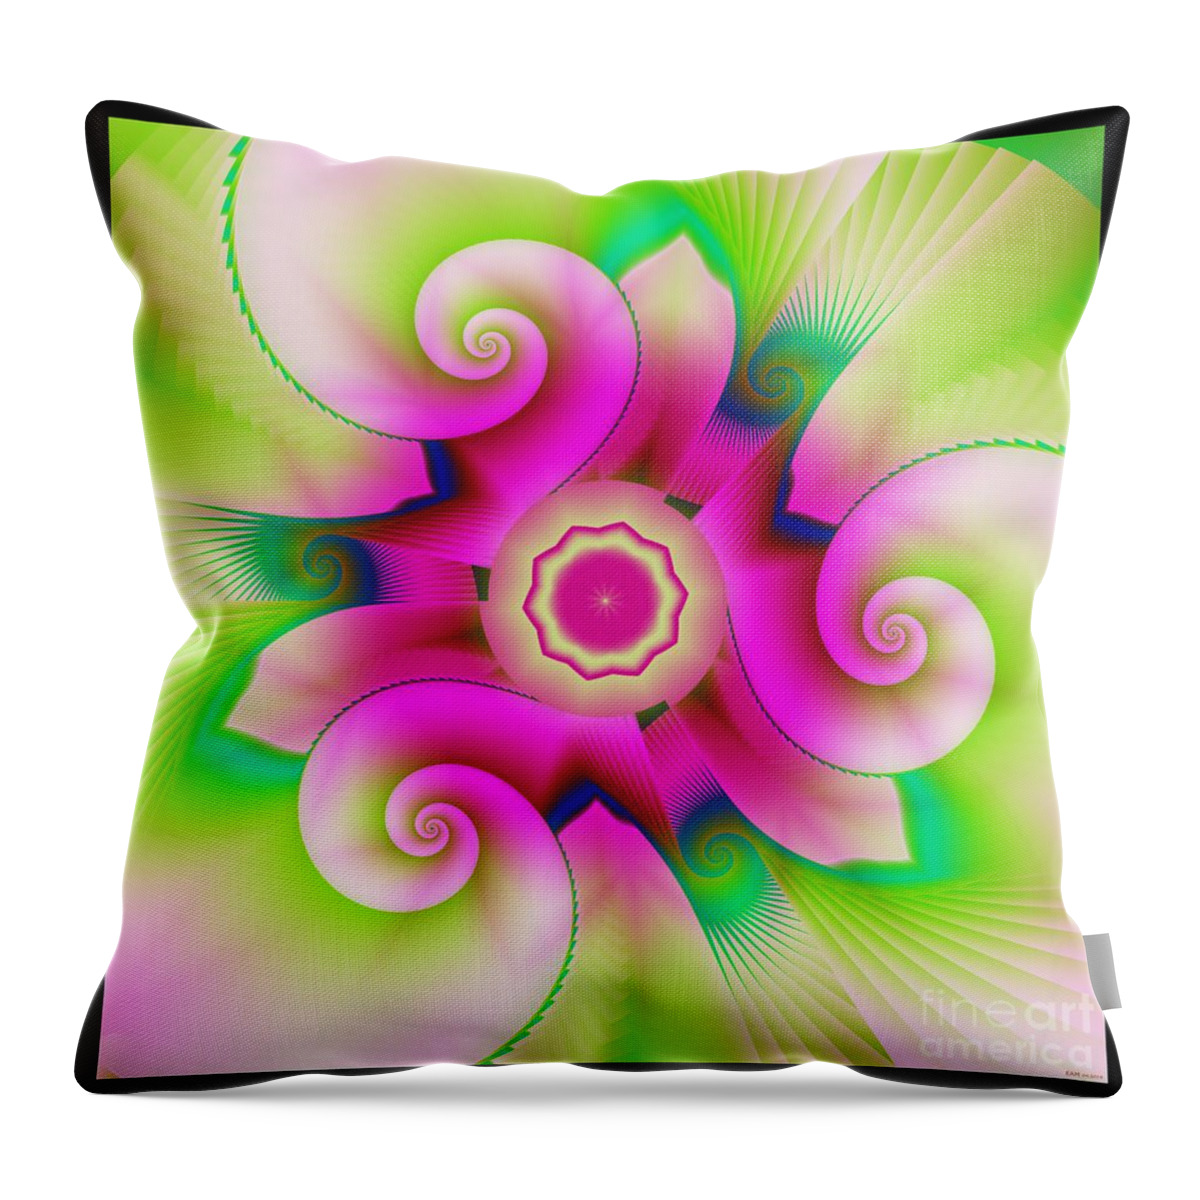 Softly Pink And Green Throw Pillow featuring the digital art Softly Pink and Green by Elizabeth McTaggart